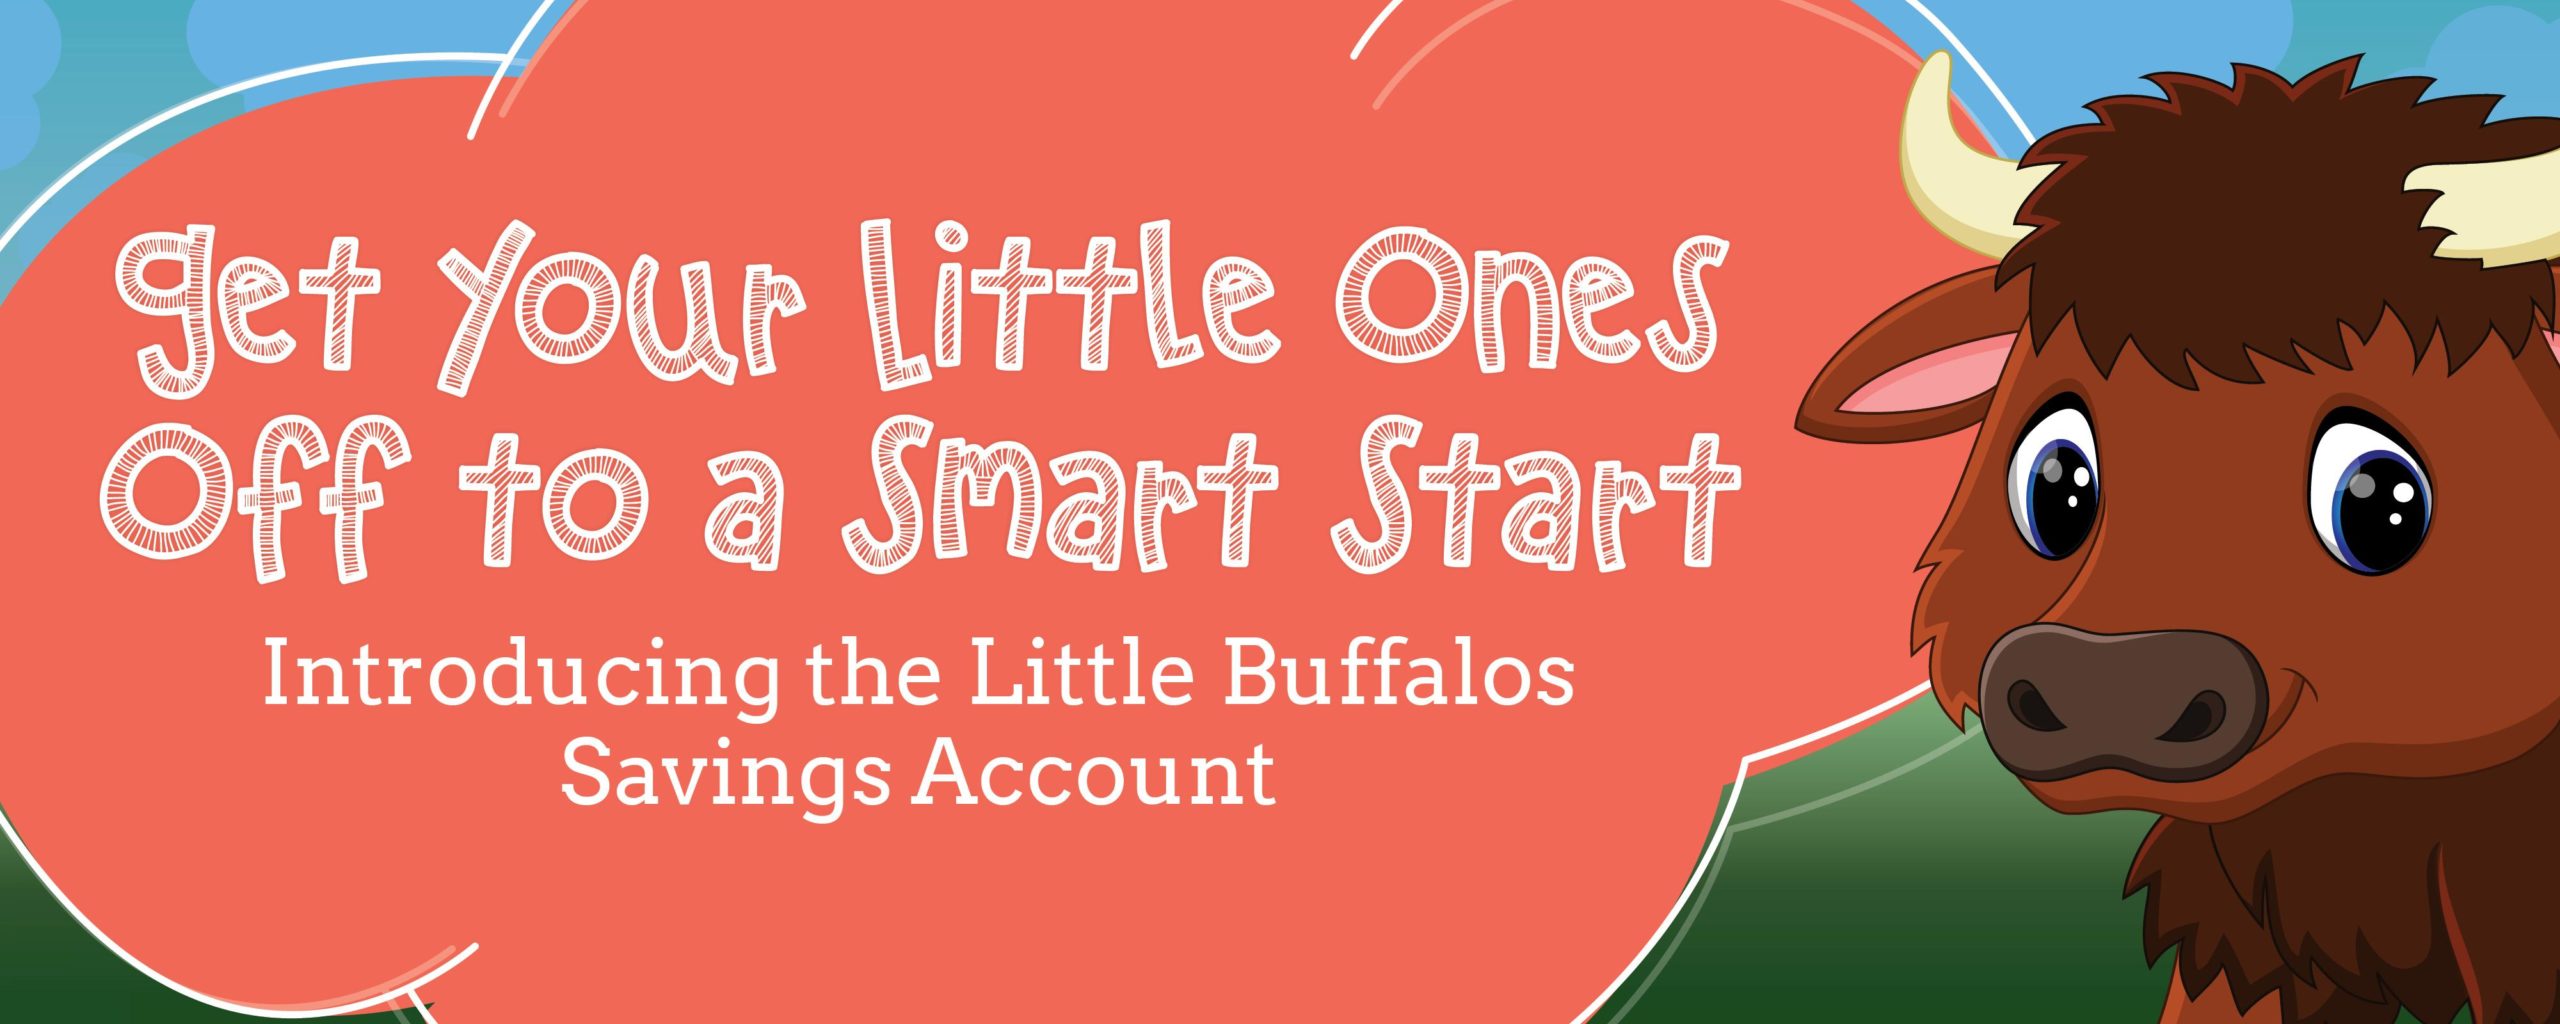 Get your little ones off to a smart start